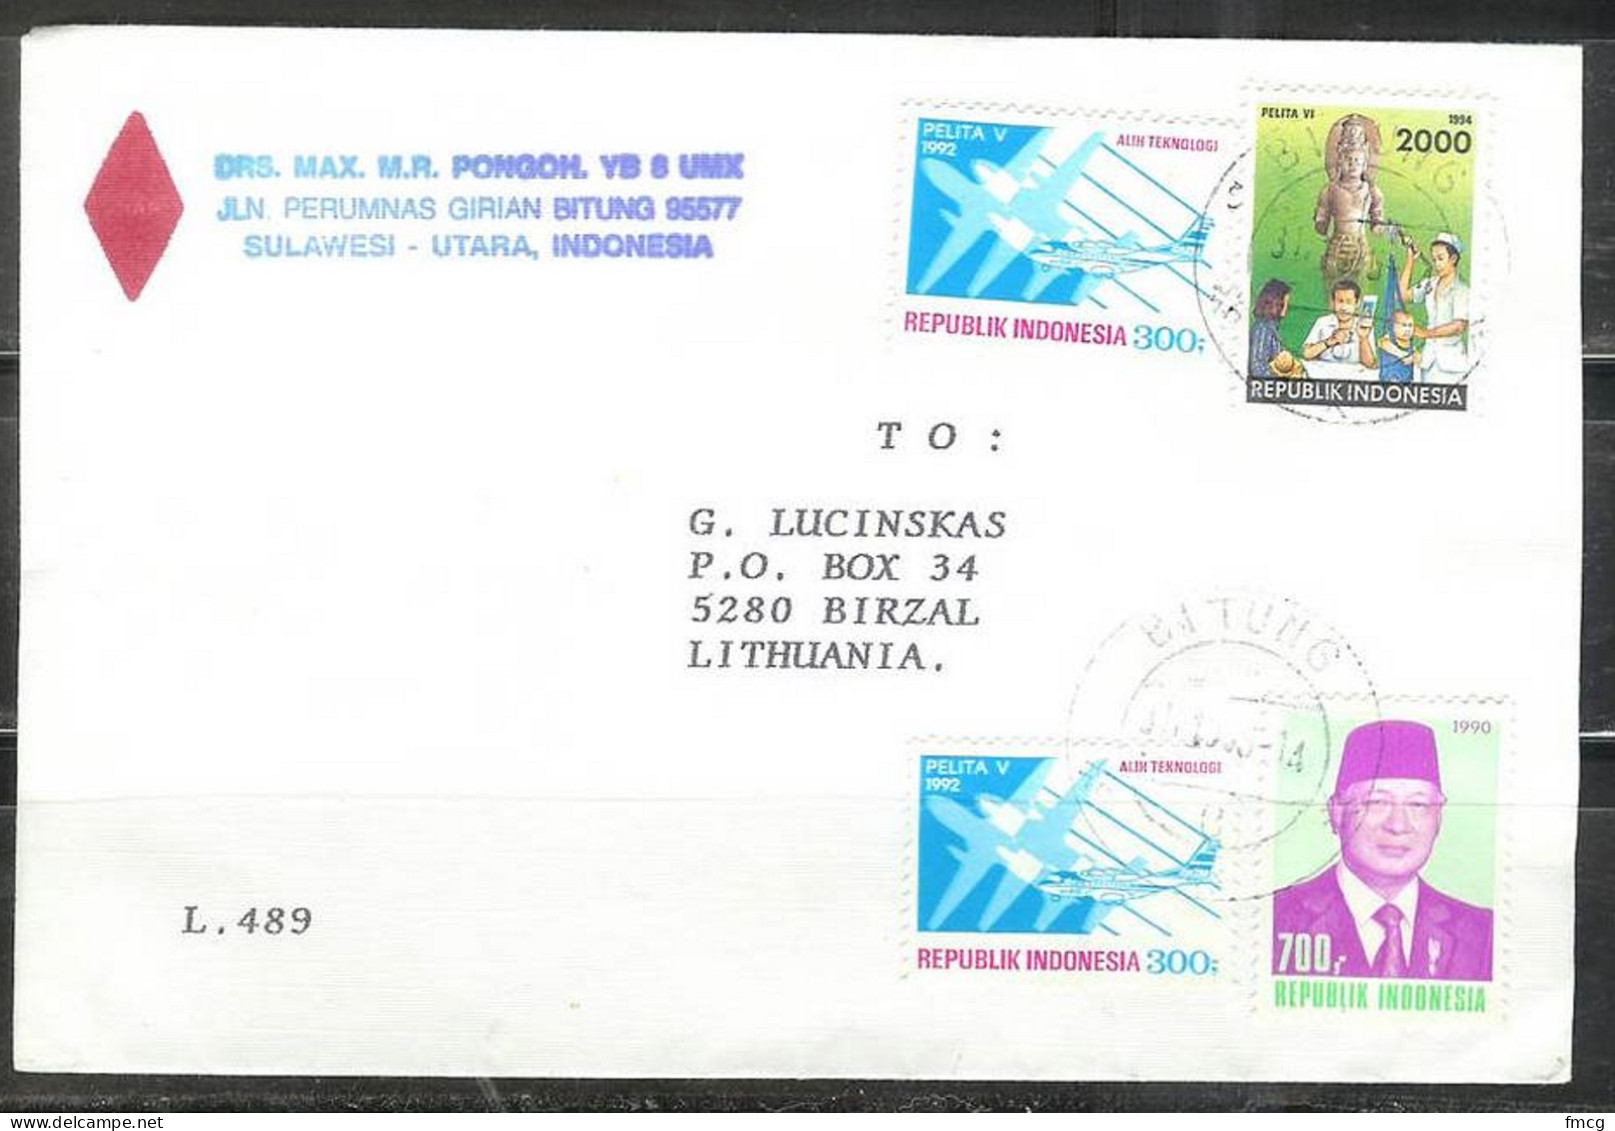 1996 To Lithuania With 1992 Aviation Technology Stamp - Airplane - Indonesia